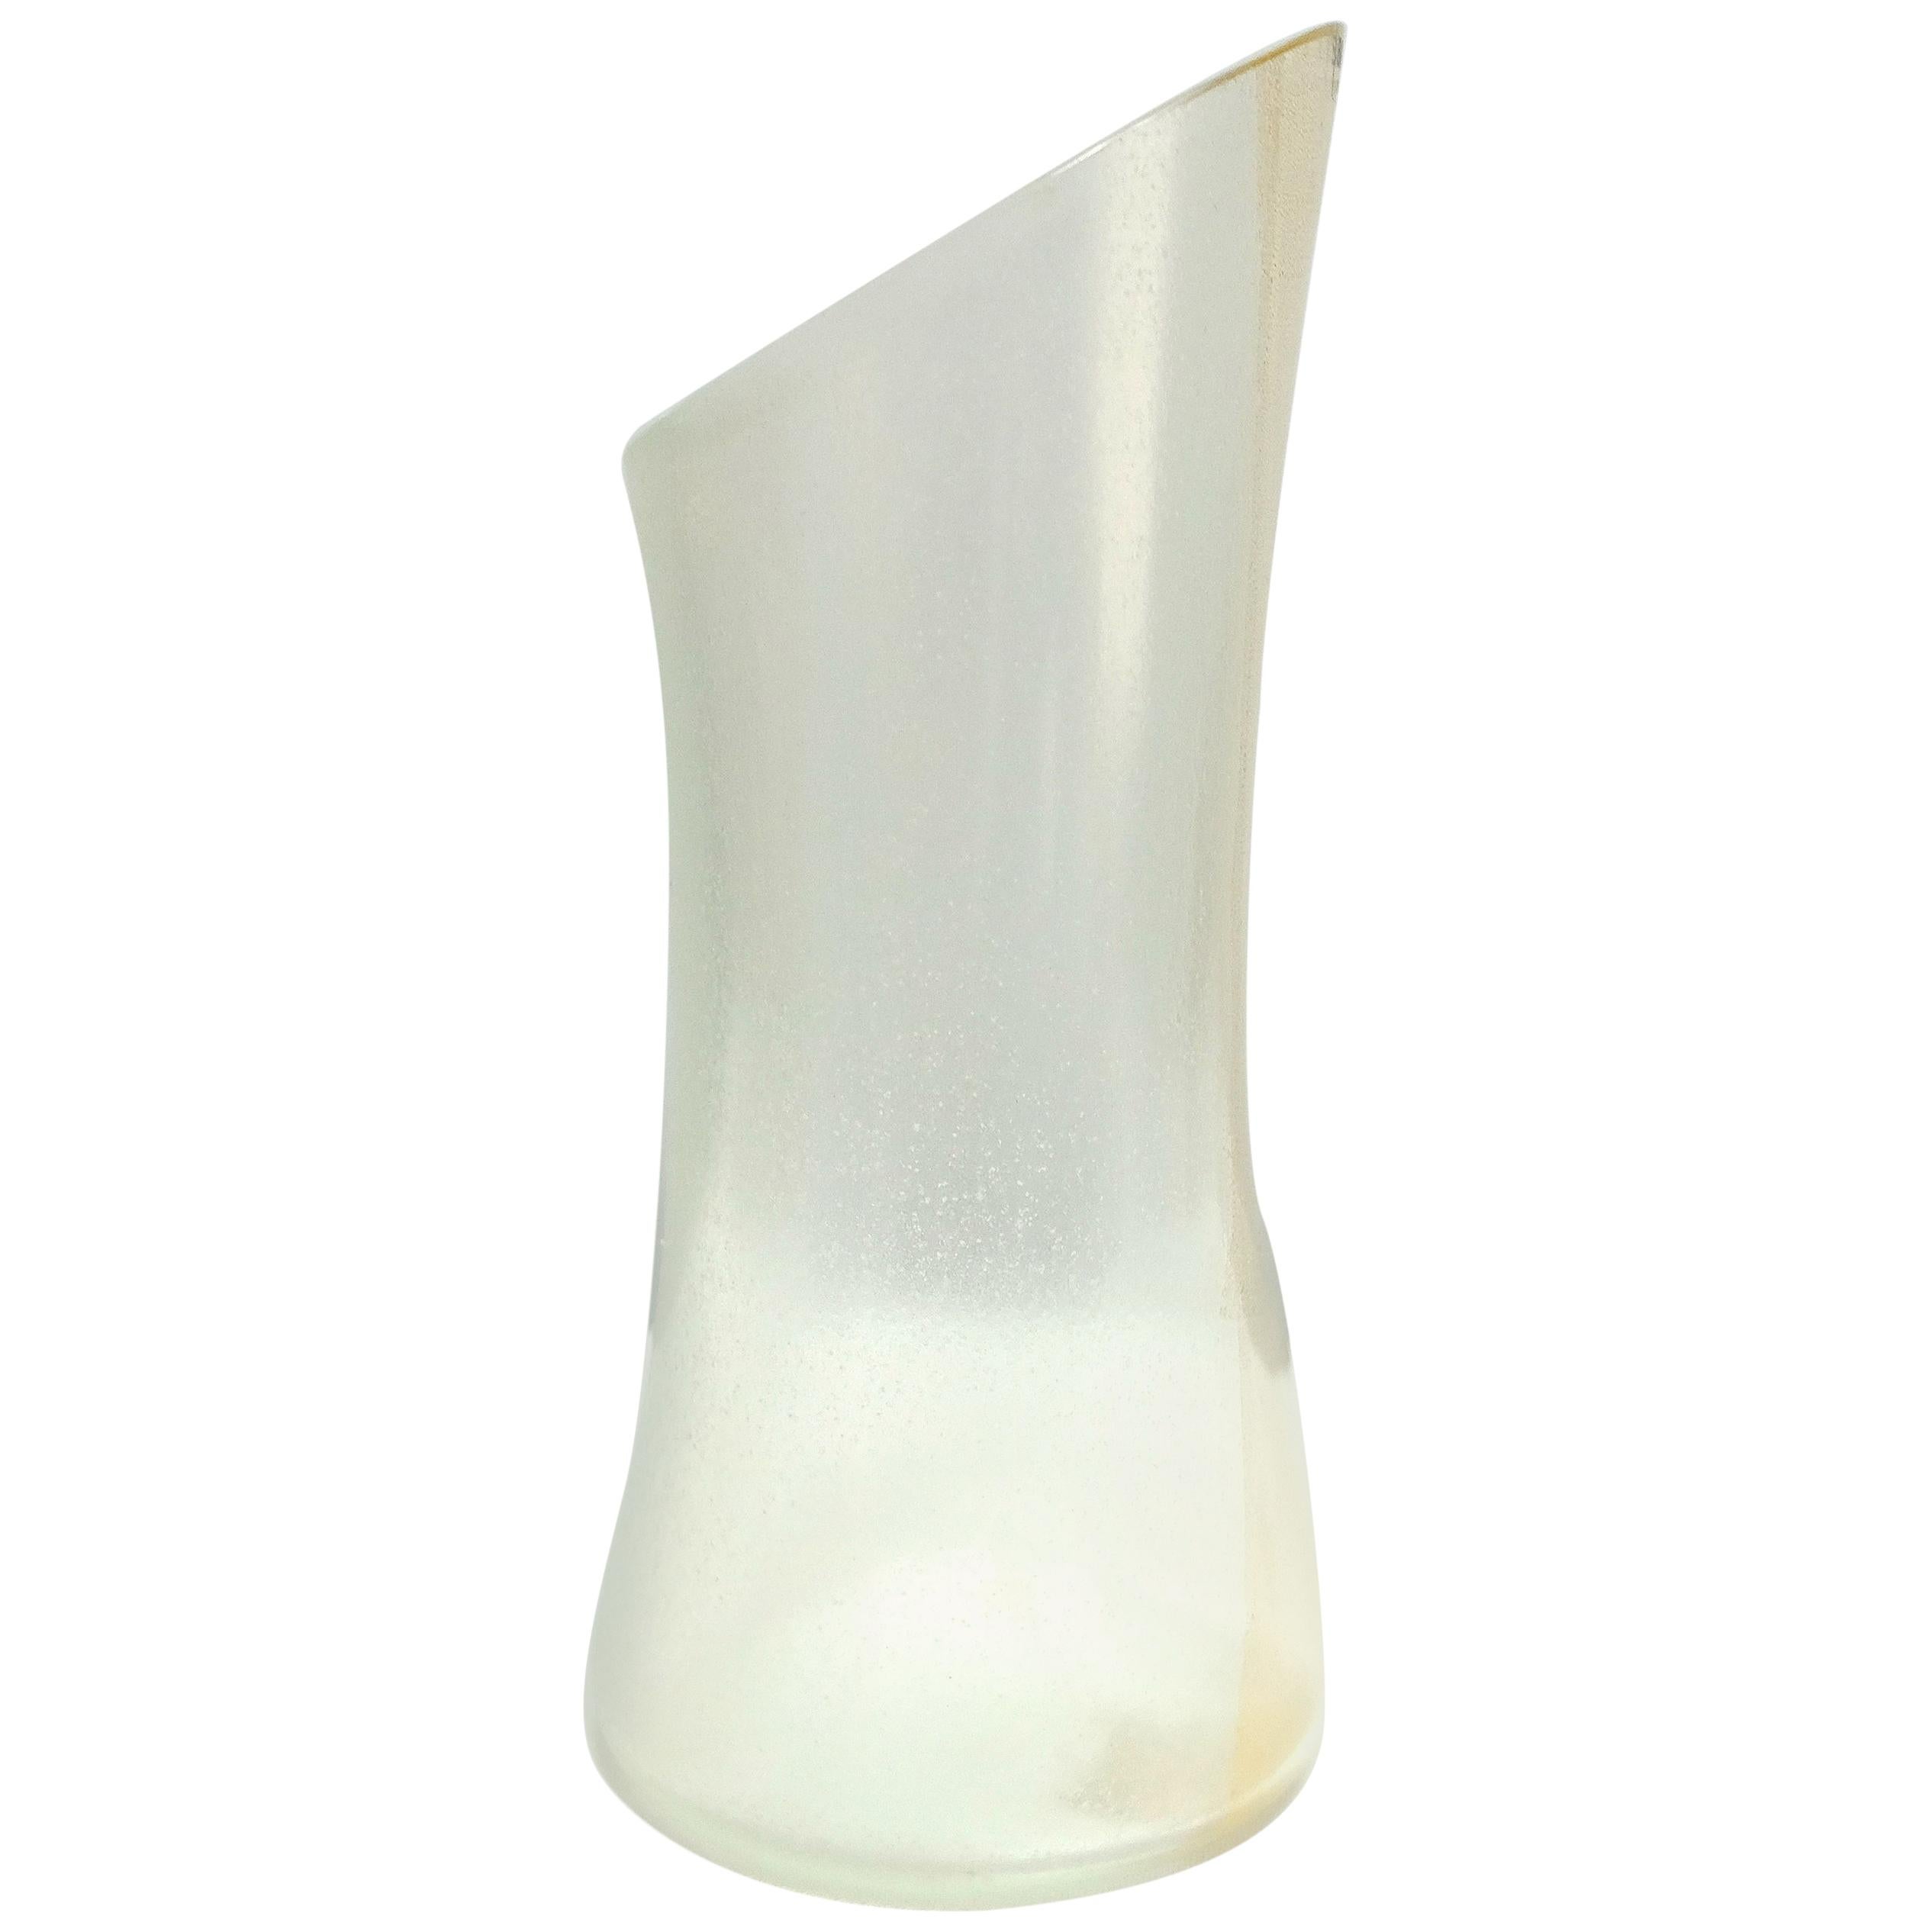  Murano Glass Vase with Infused Gold by Barbini, Italy, Asymmetric